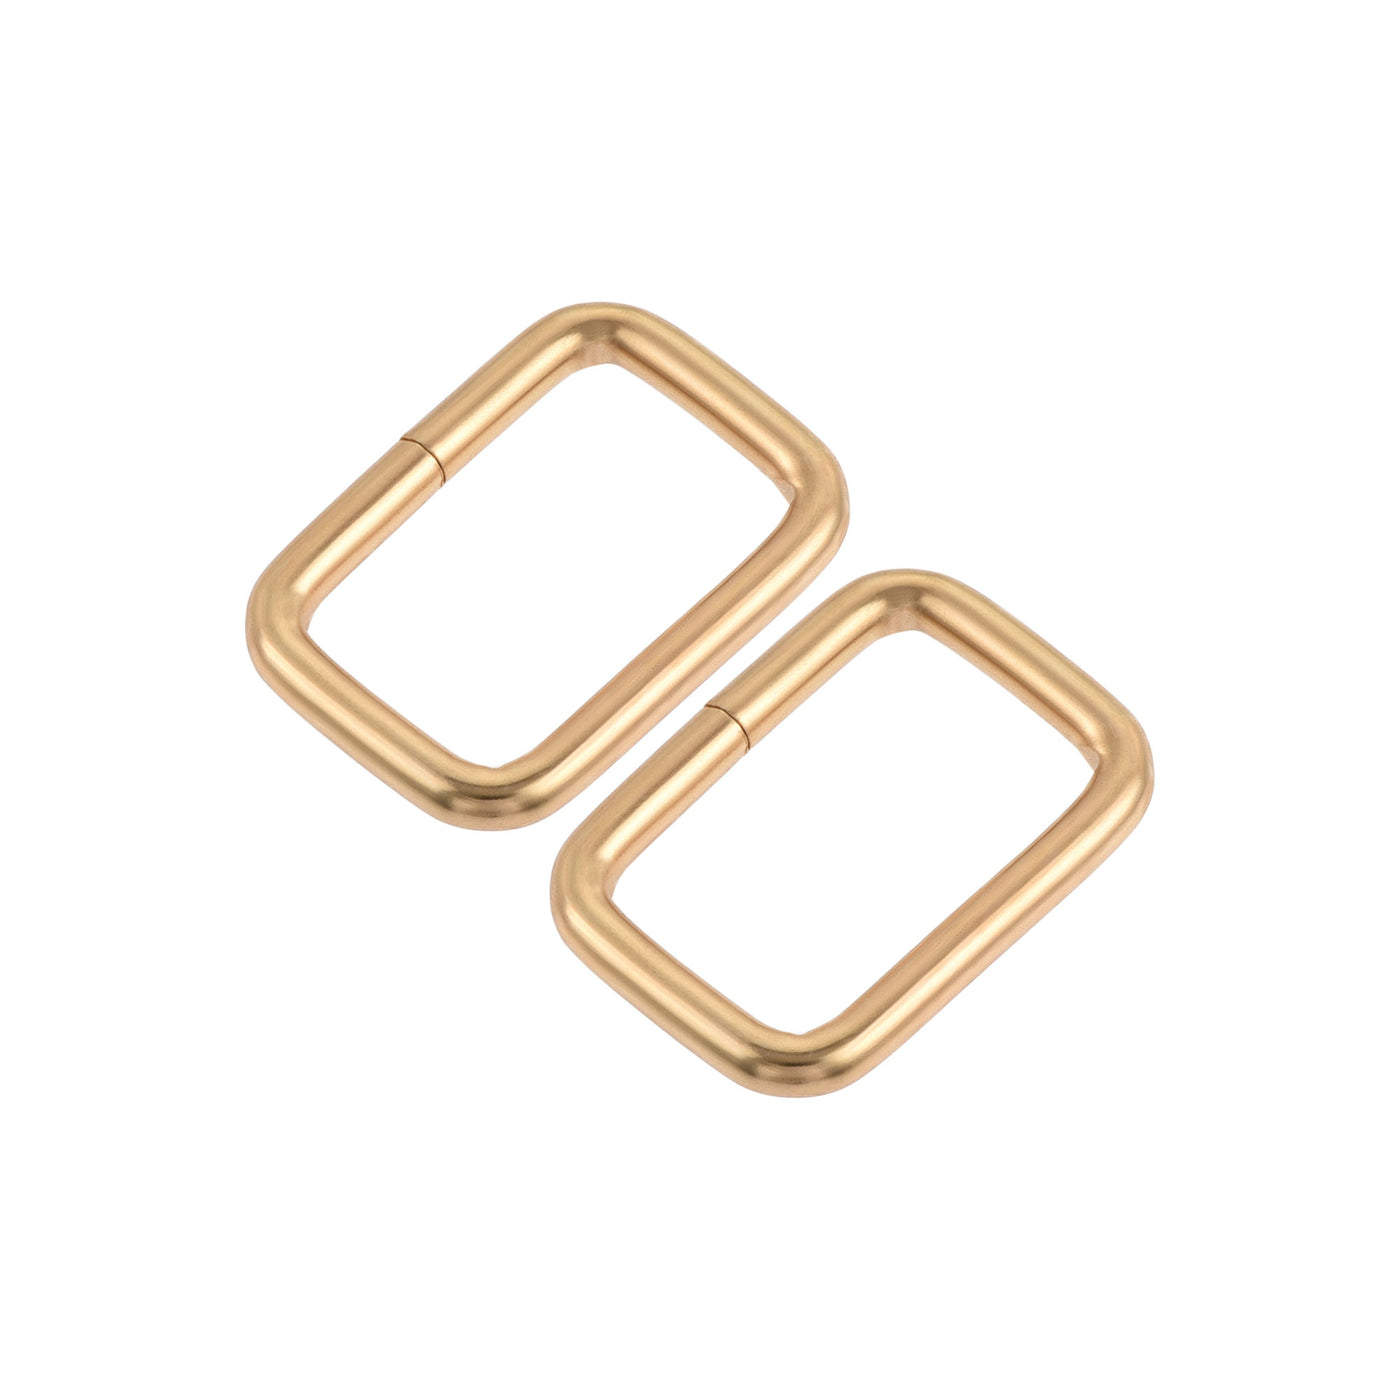 uxcell Uxcell Metal Rectangle Ring Buckles 25x16mm for Bags Belts DIY Gold Tone 20pcs